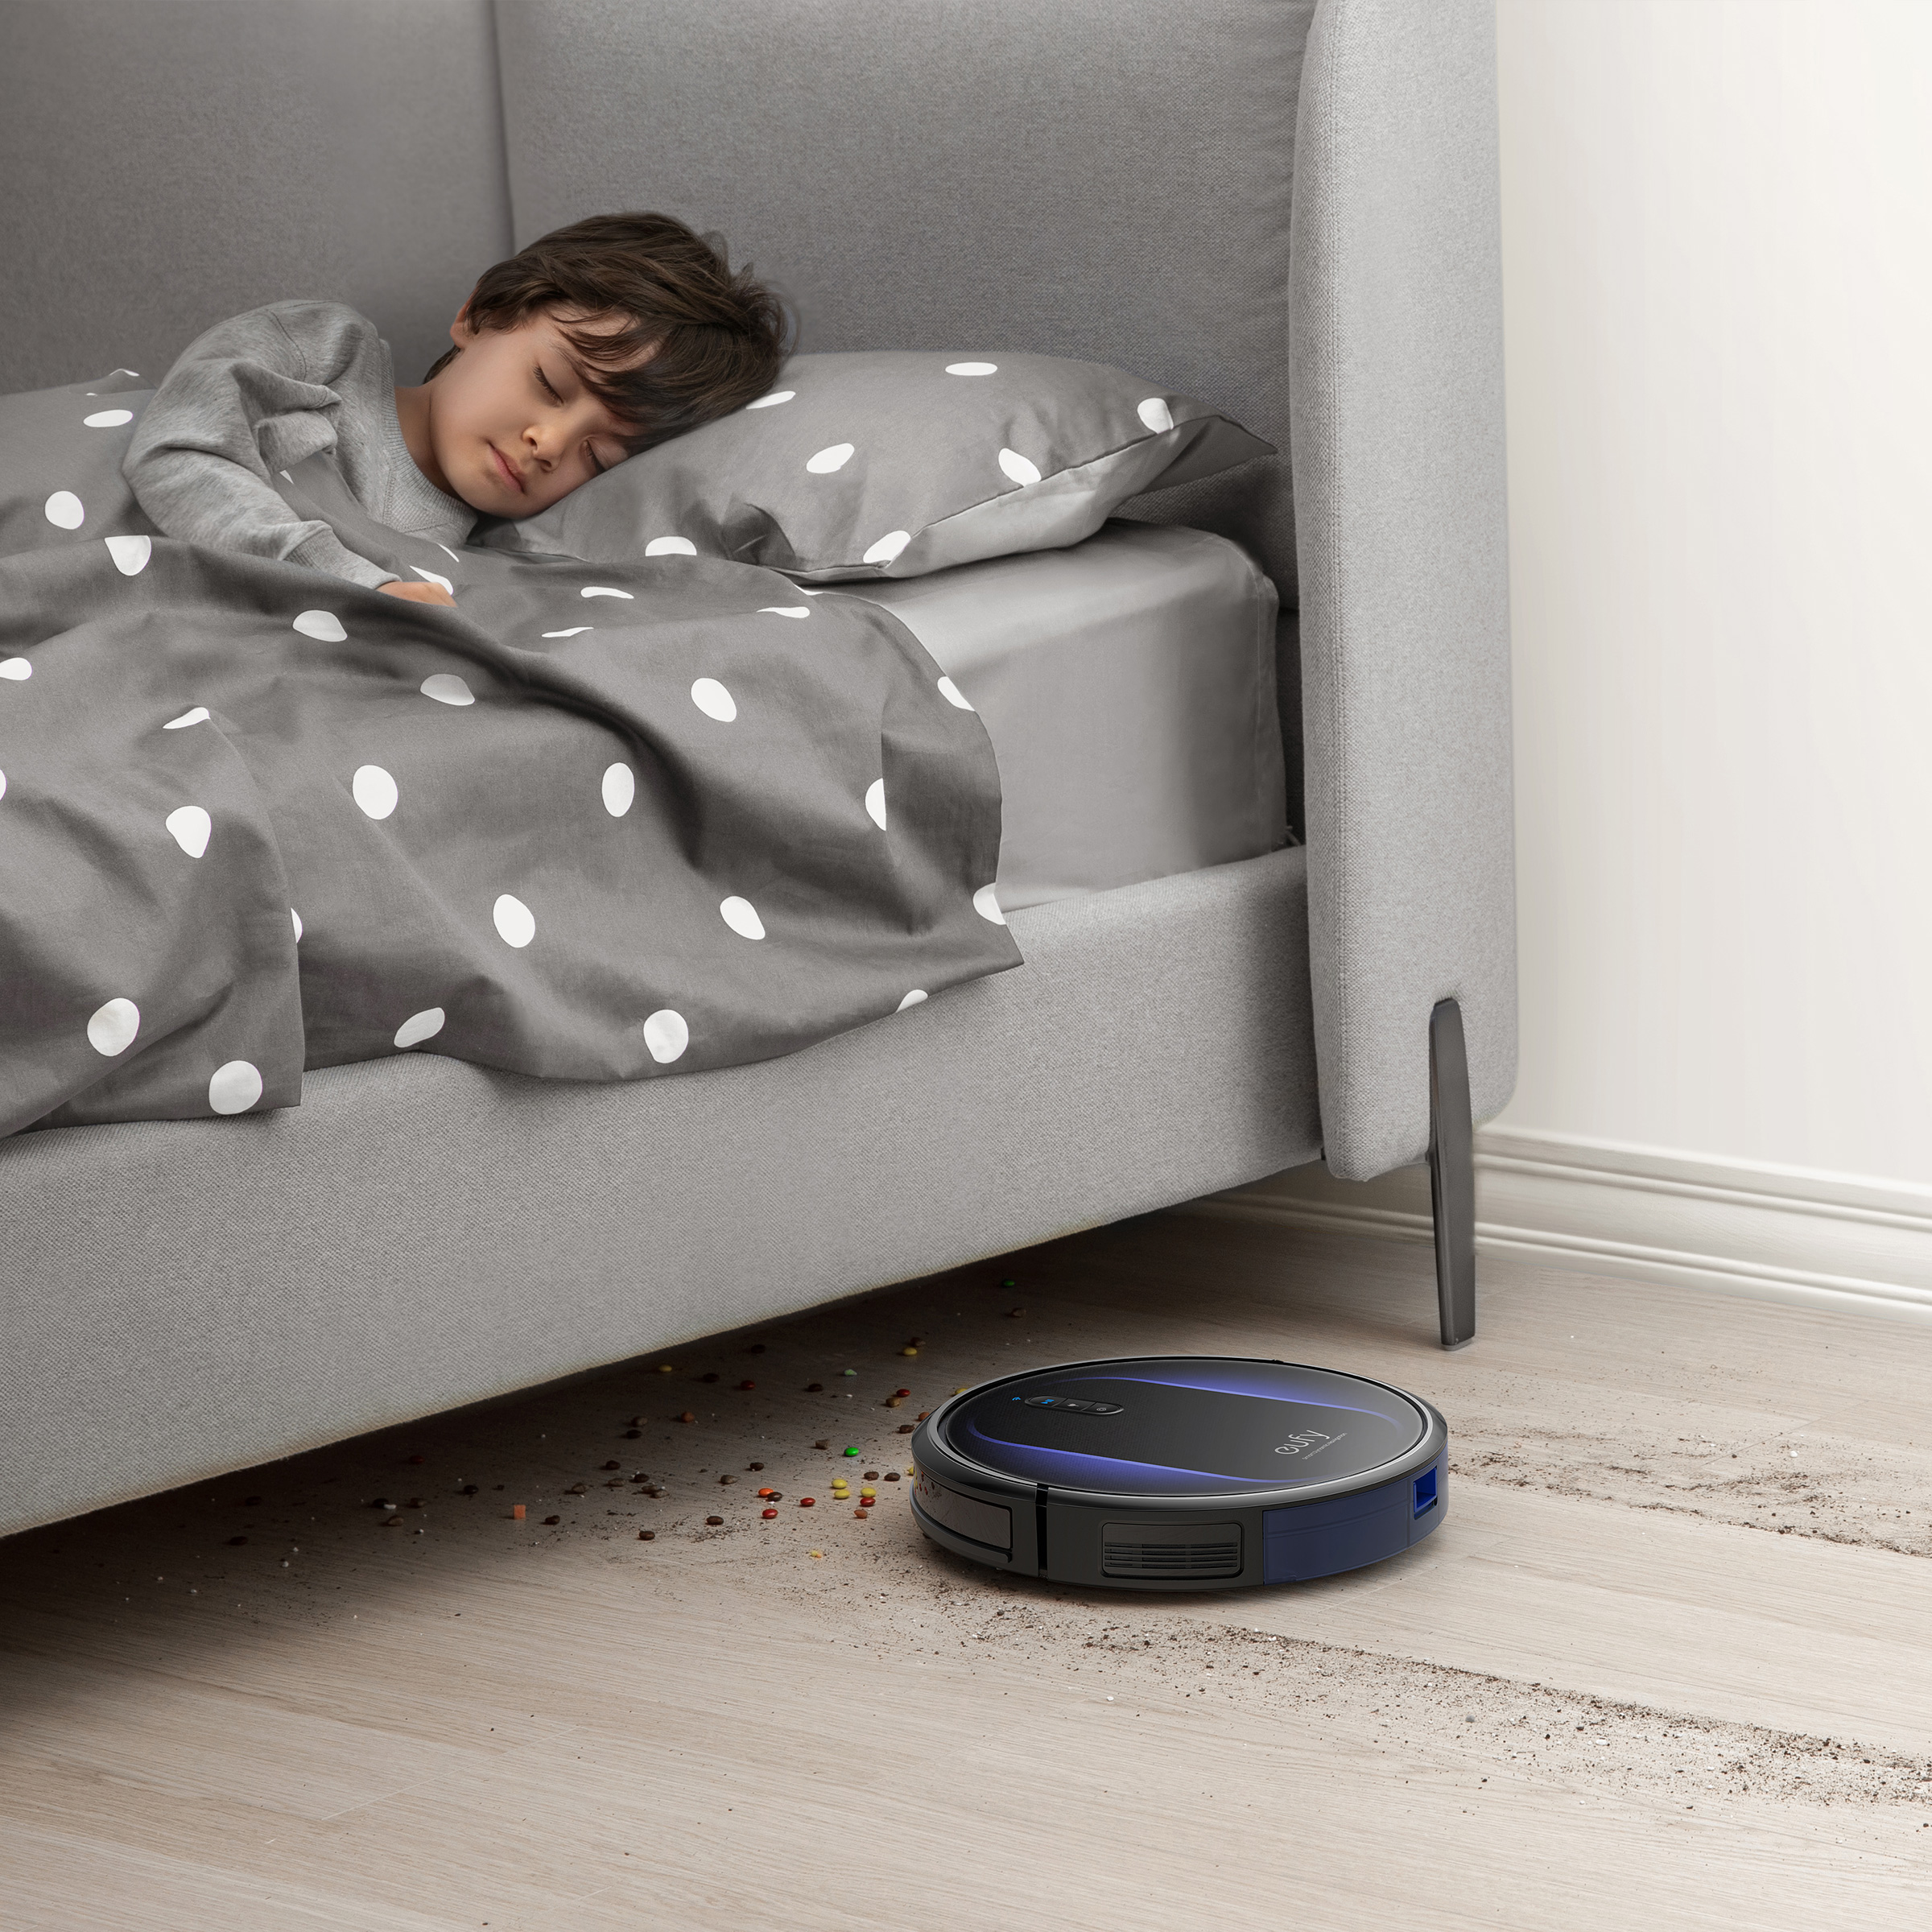 eufy Clean by Anker RoboVac G32 Pro Robot Vacuum with Home Mapping, 2000 Pa Strong Suction, Wi-Fi enabled, Ideal for Carpets, Hardwood Floors, and Pet Owners, Supports Only 2.4Ghz Wi-Fi - image 12 of 15